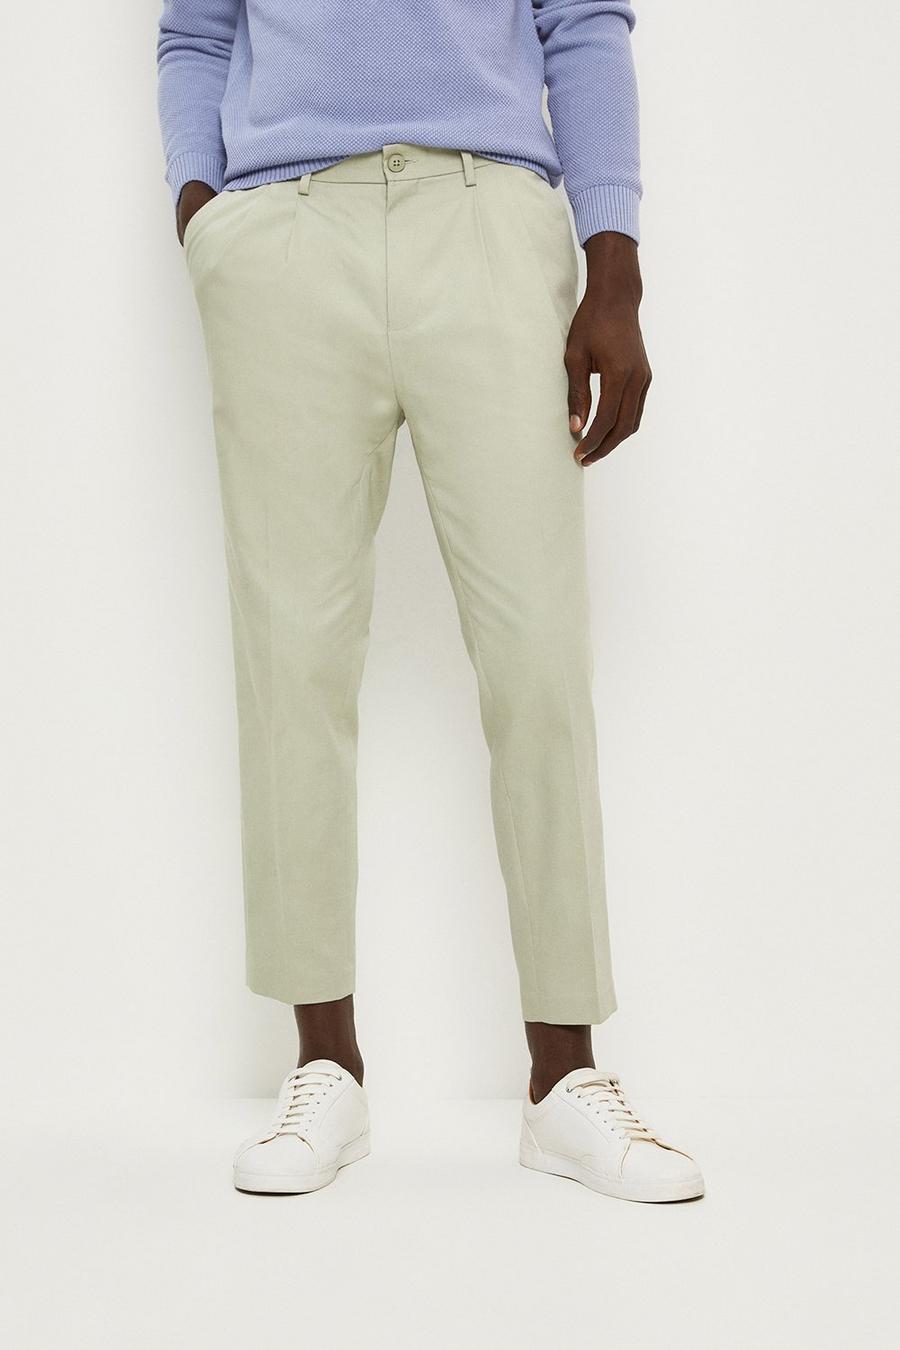 Slim Fit Light Green Pleat Front Smart Chino Trousers